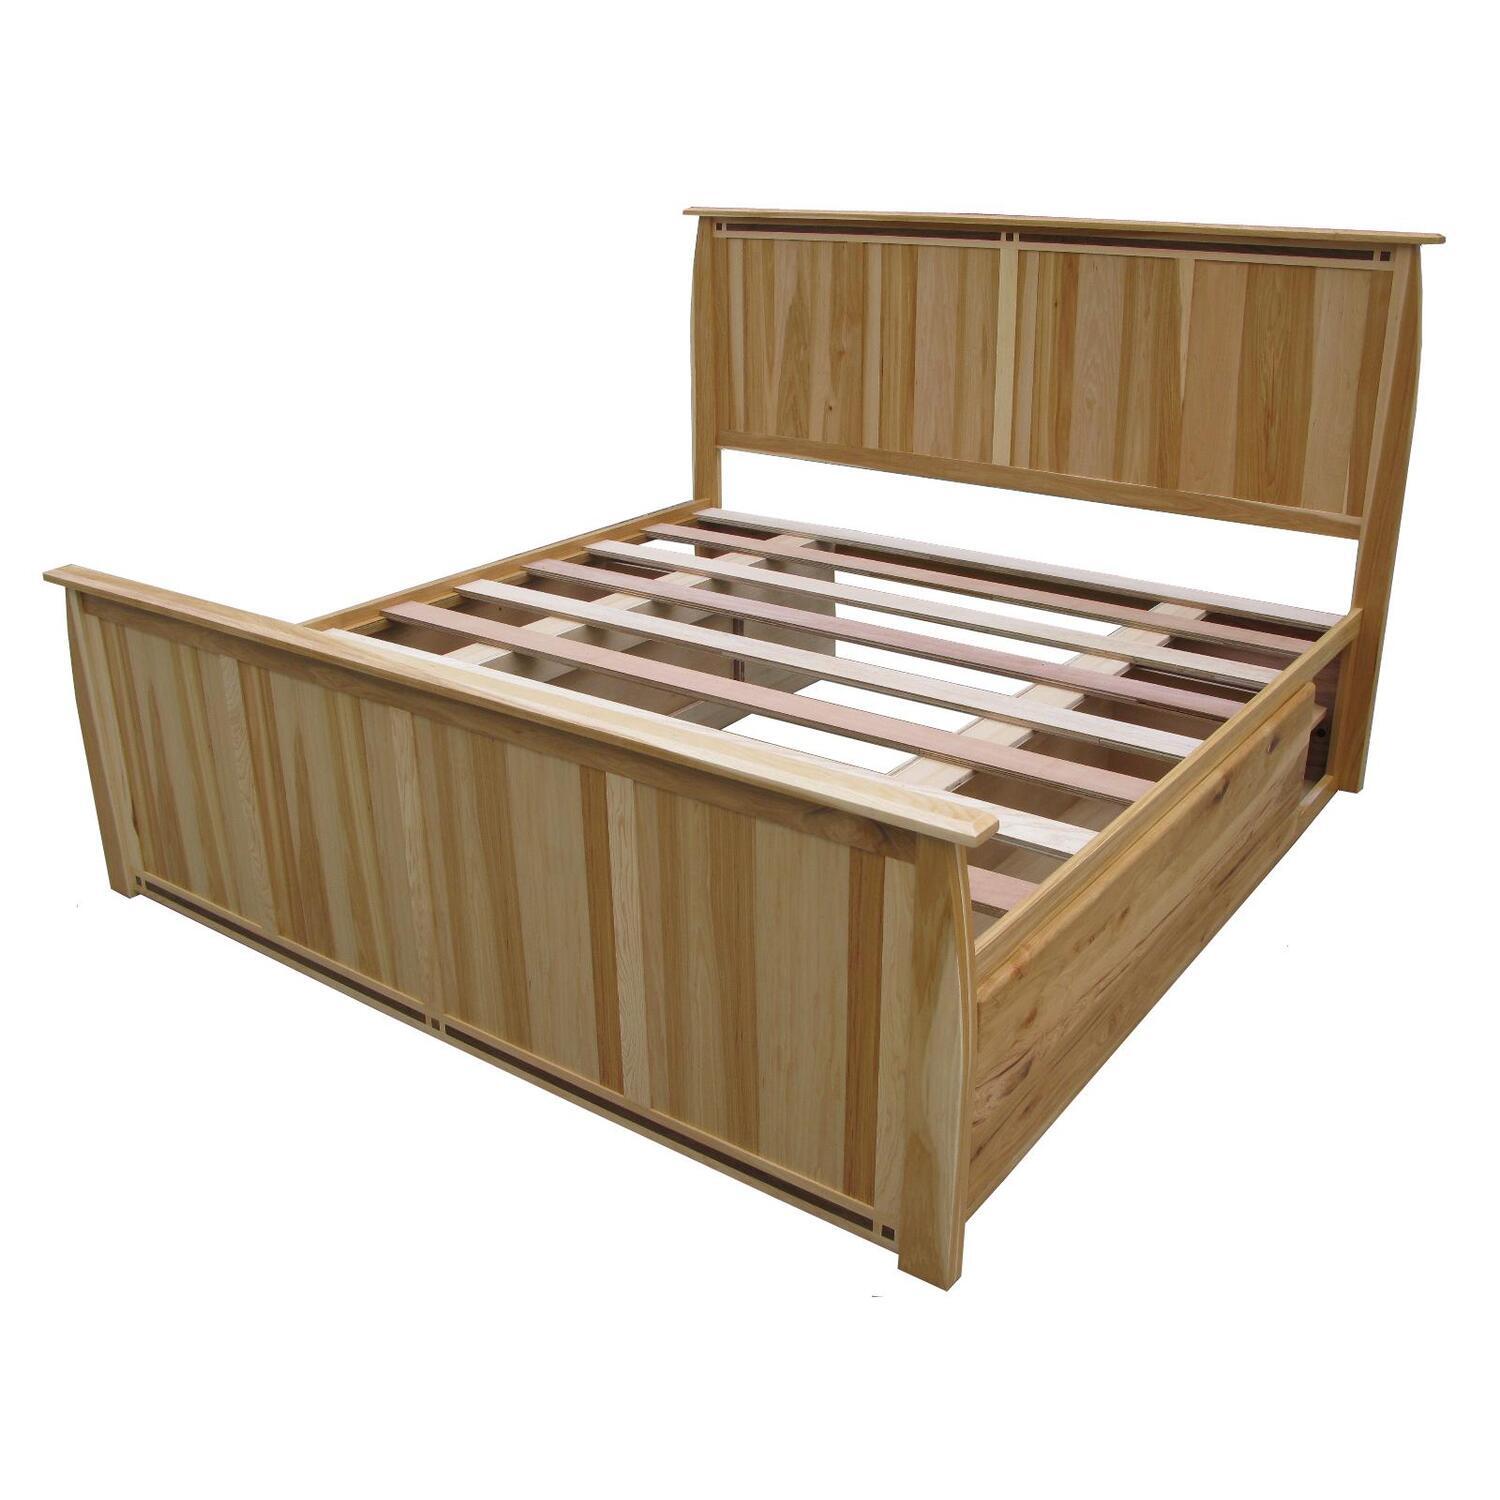 A-America Adamstown Queen Storage Bed in Natural - image 1 of 4